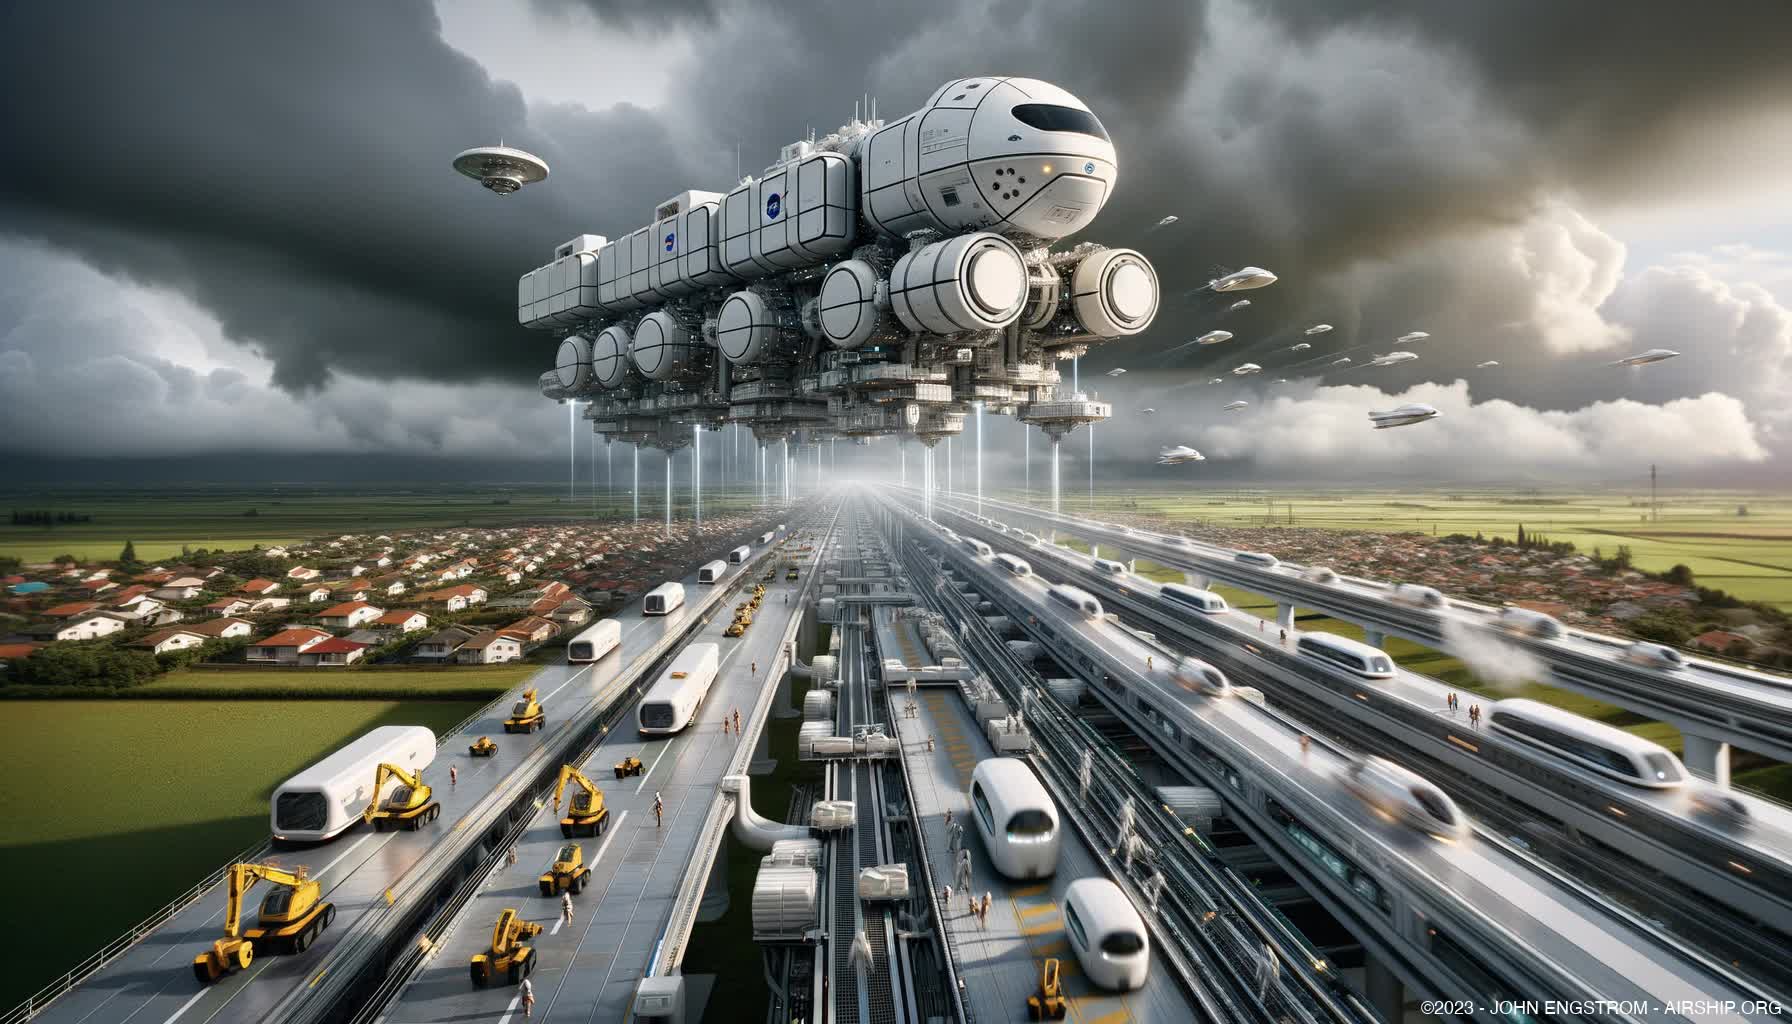 Airship-Assembled-Linear-Cities-127